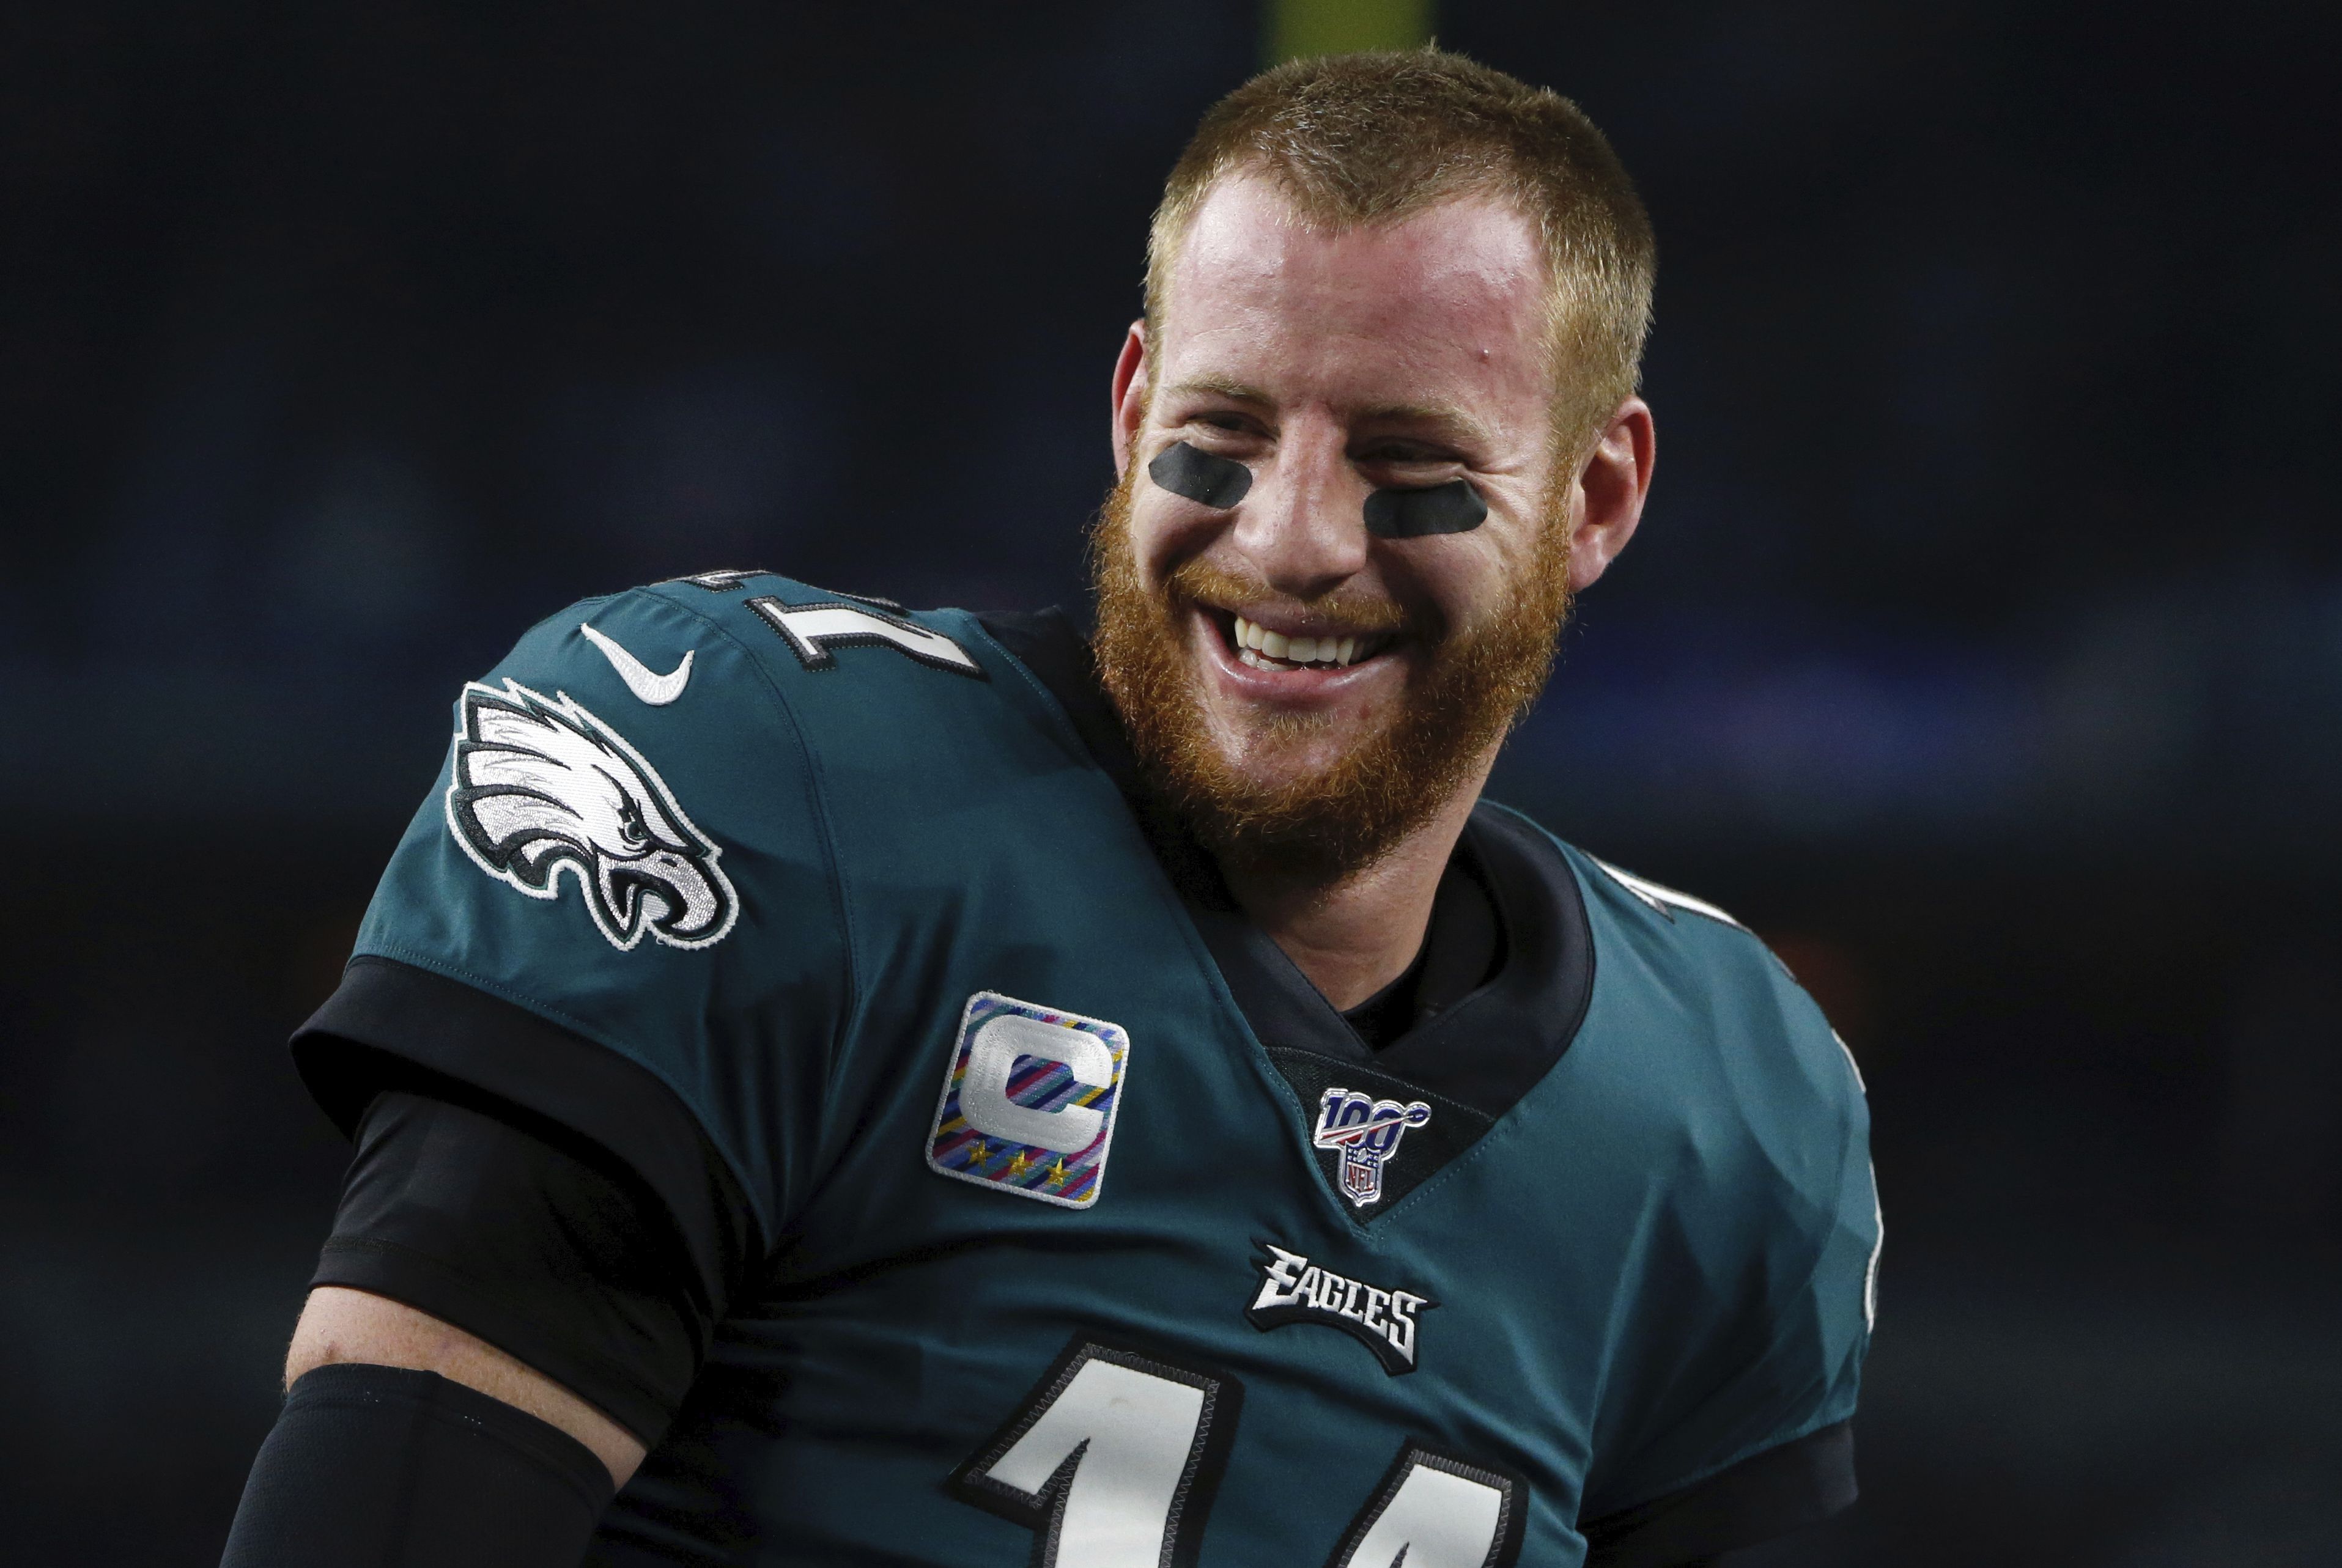 The Eagles used a play from 2017 to help Carson Wentz throw his